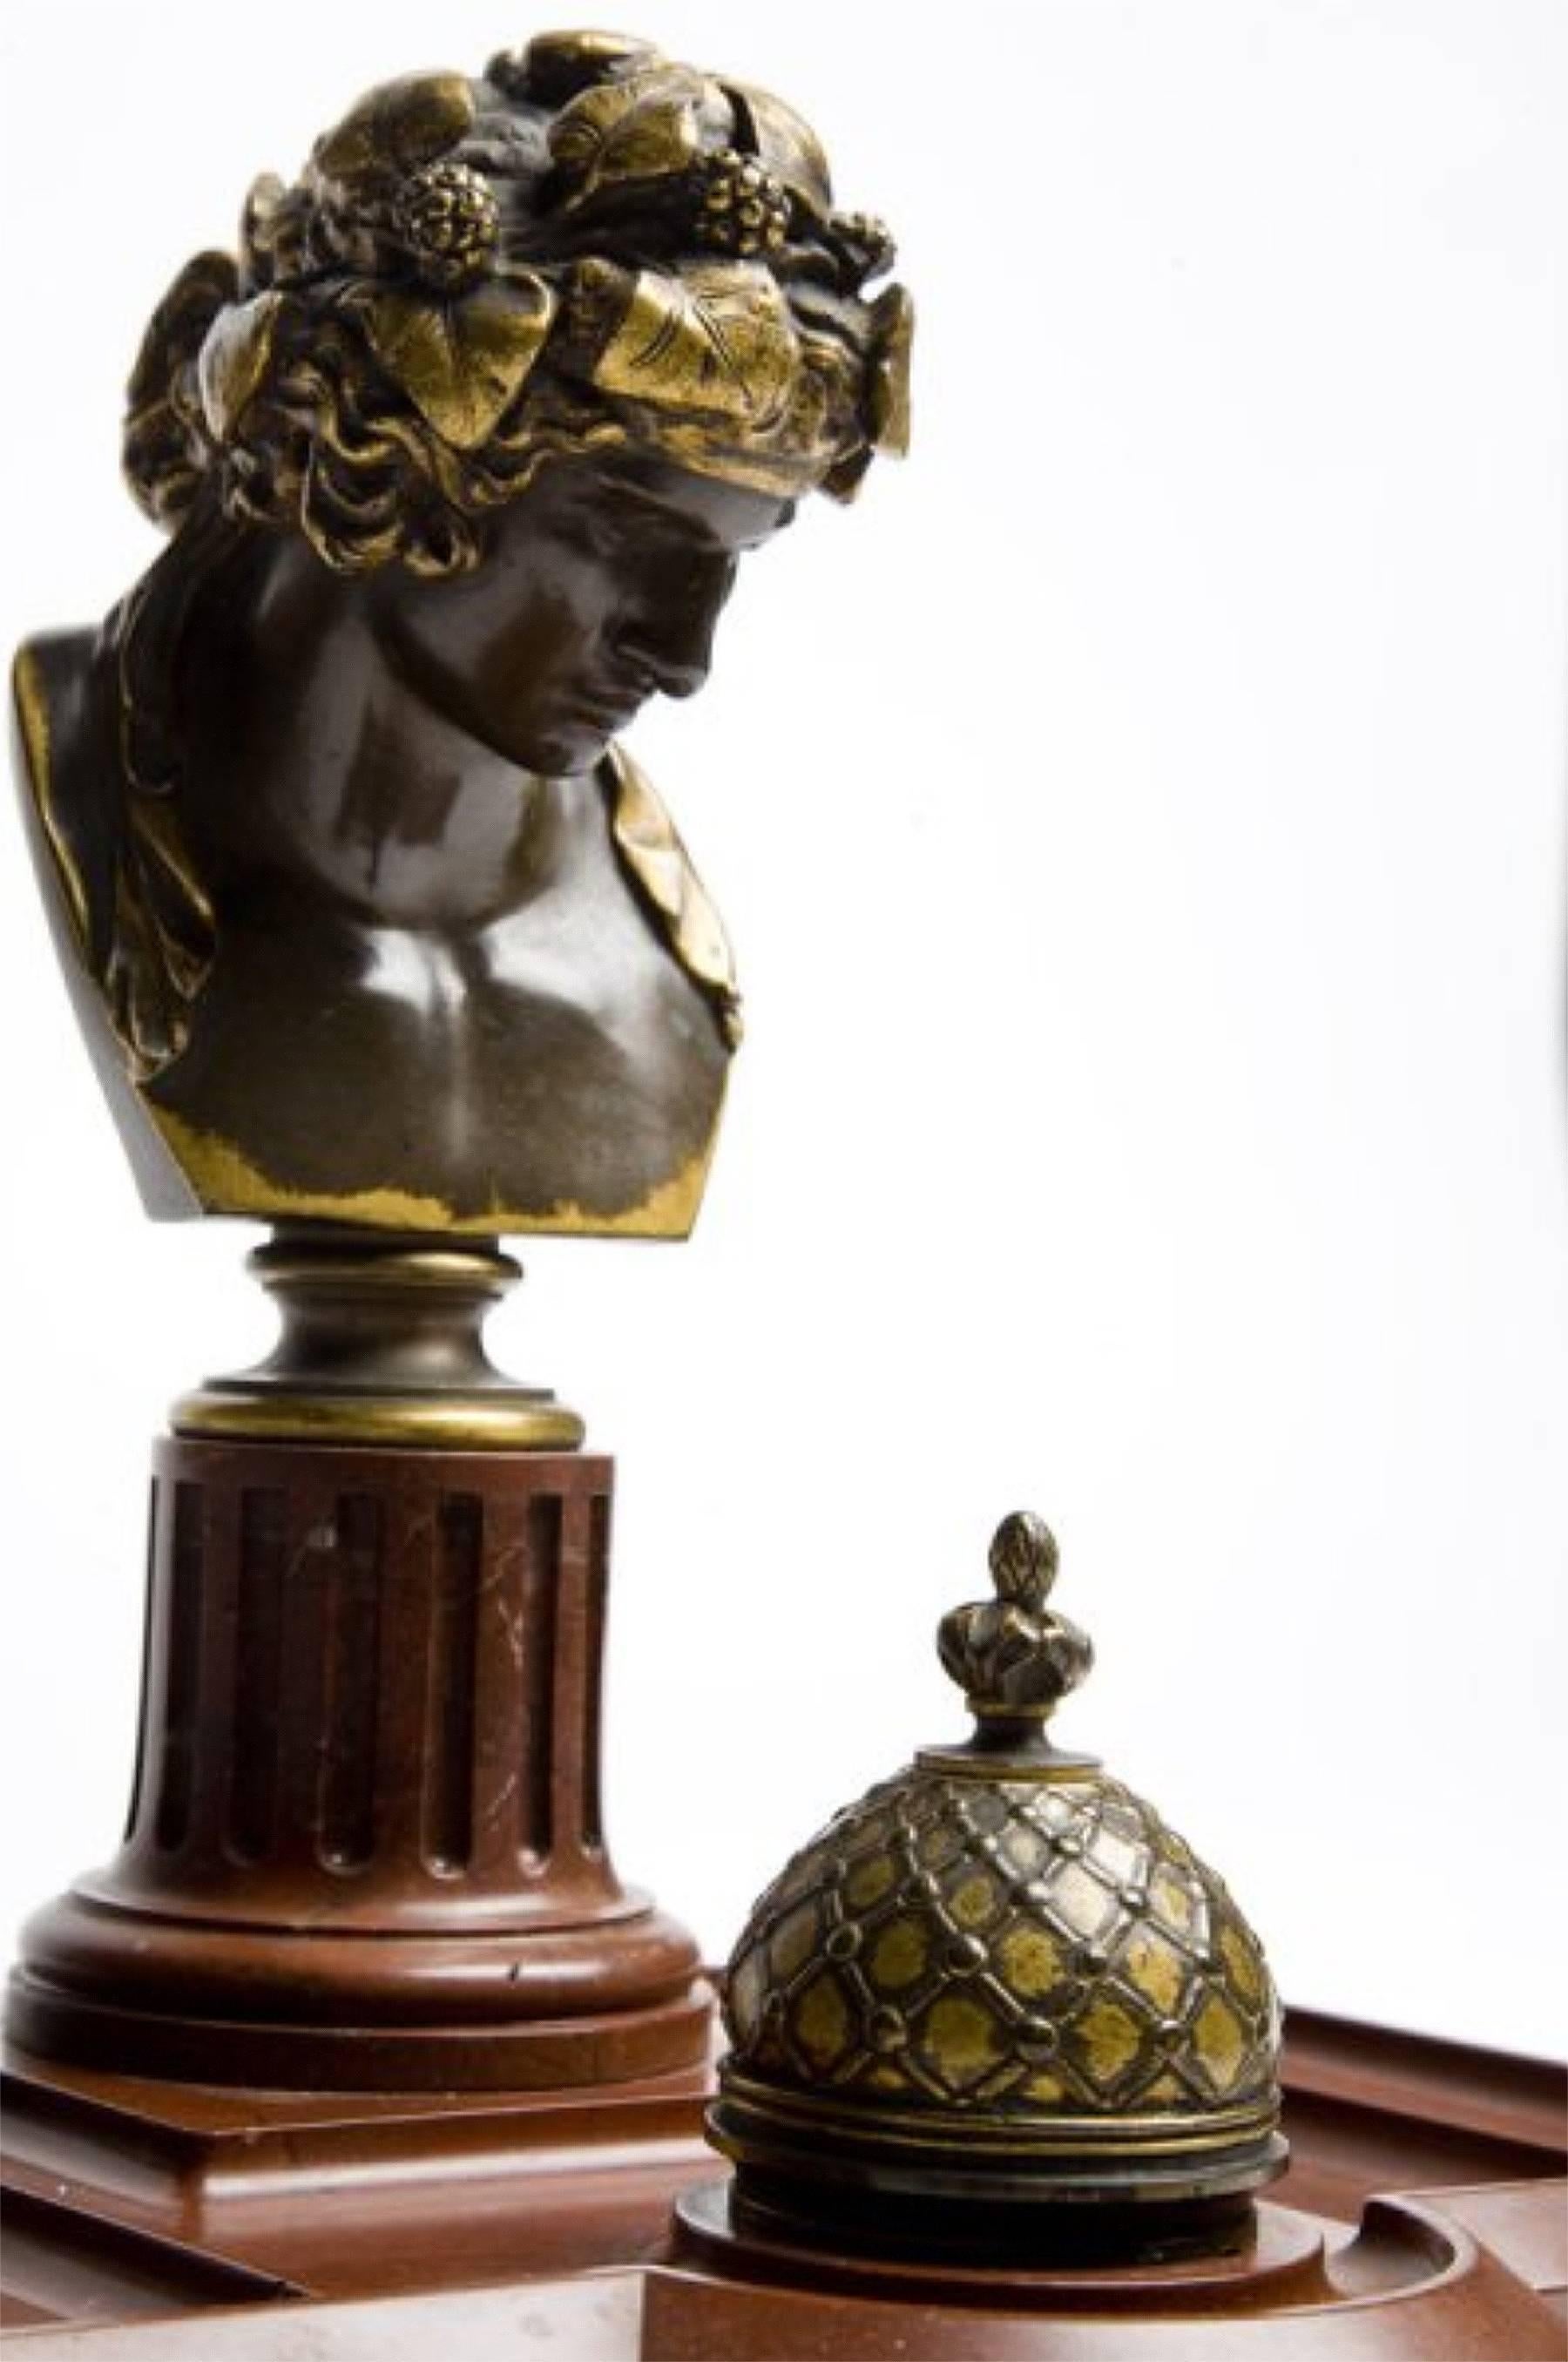 A Verona red marble remarkable inkwell, pure Empire style representing a gilded bronze of the bust of Antinous as Dioniso. Empire style, France. Signed by Ferdinand Barbedienne foundry.
Generous size, excellent state of preservation.